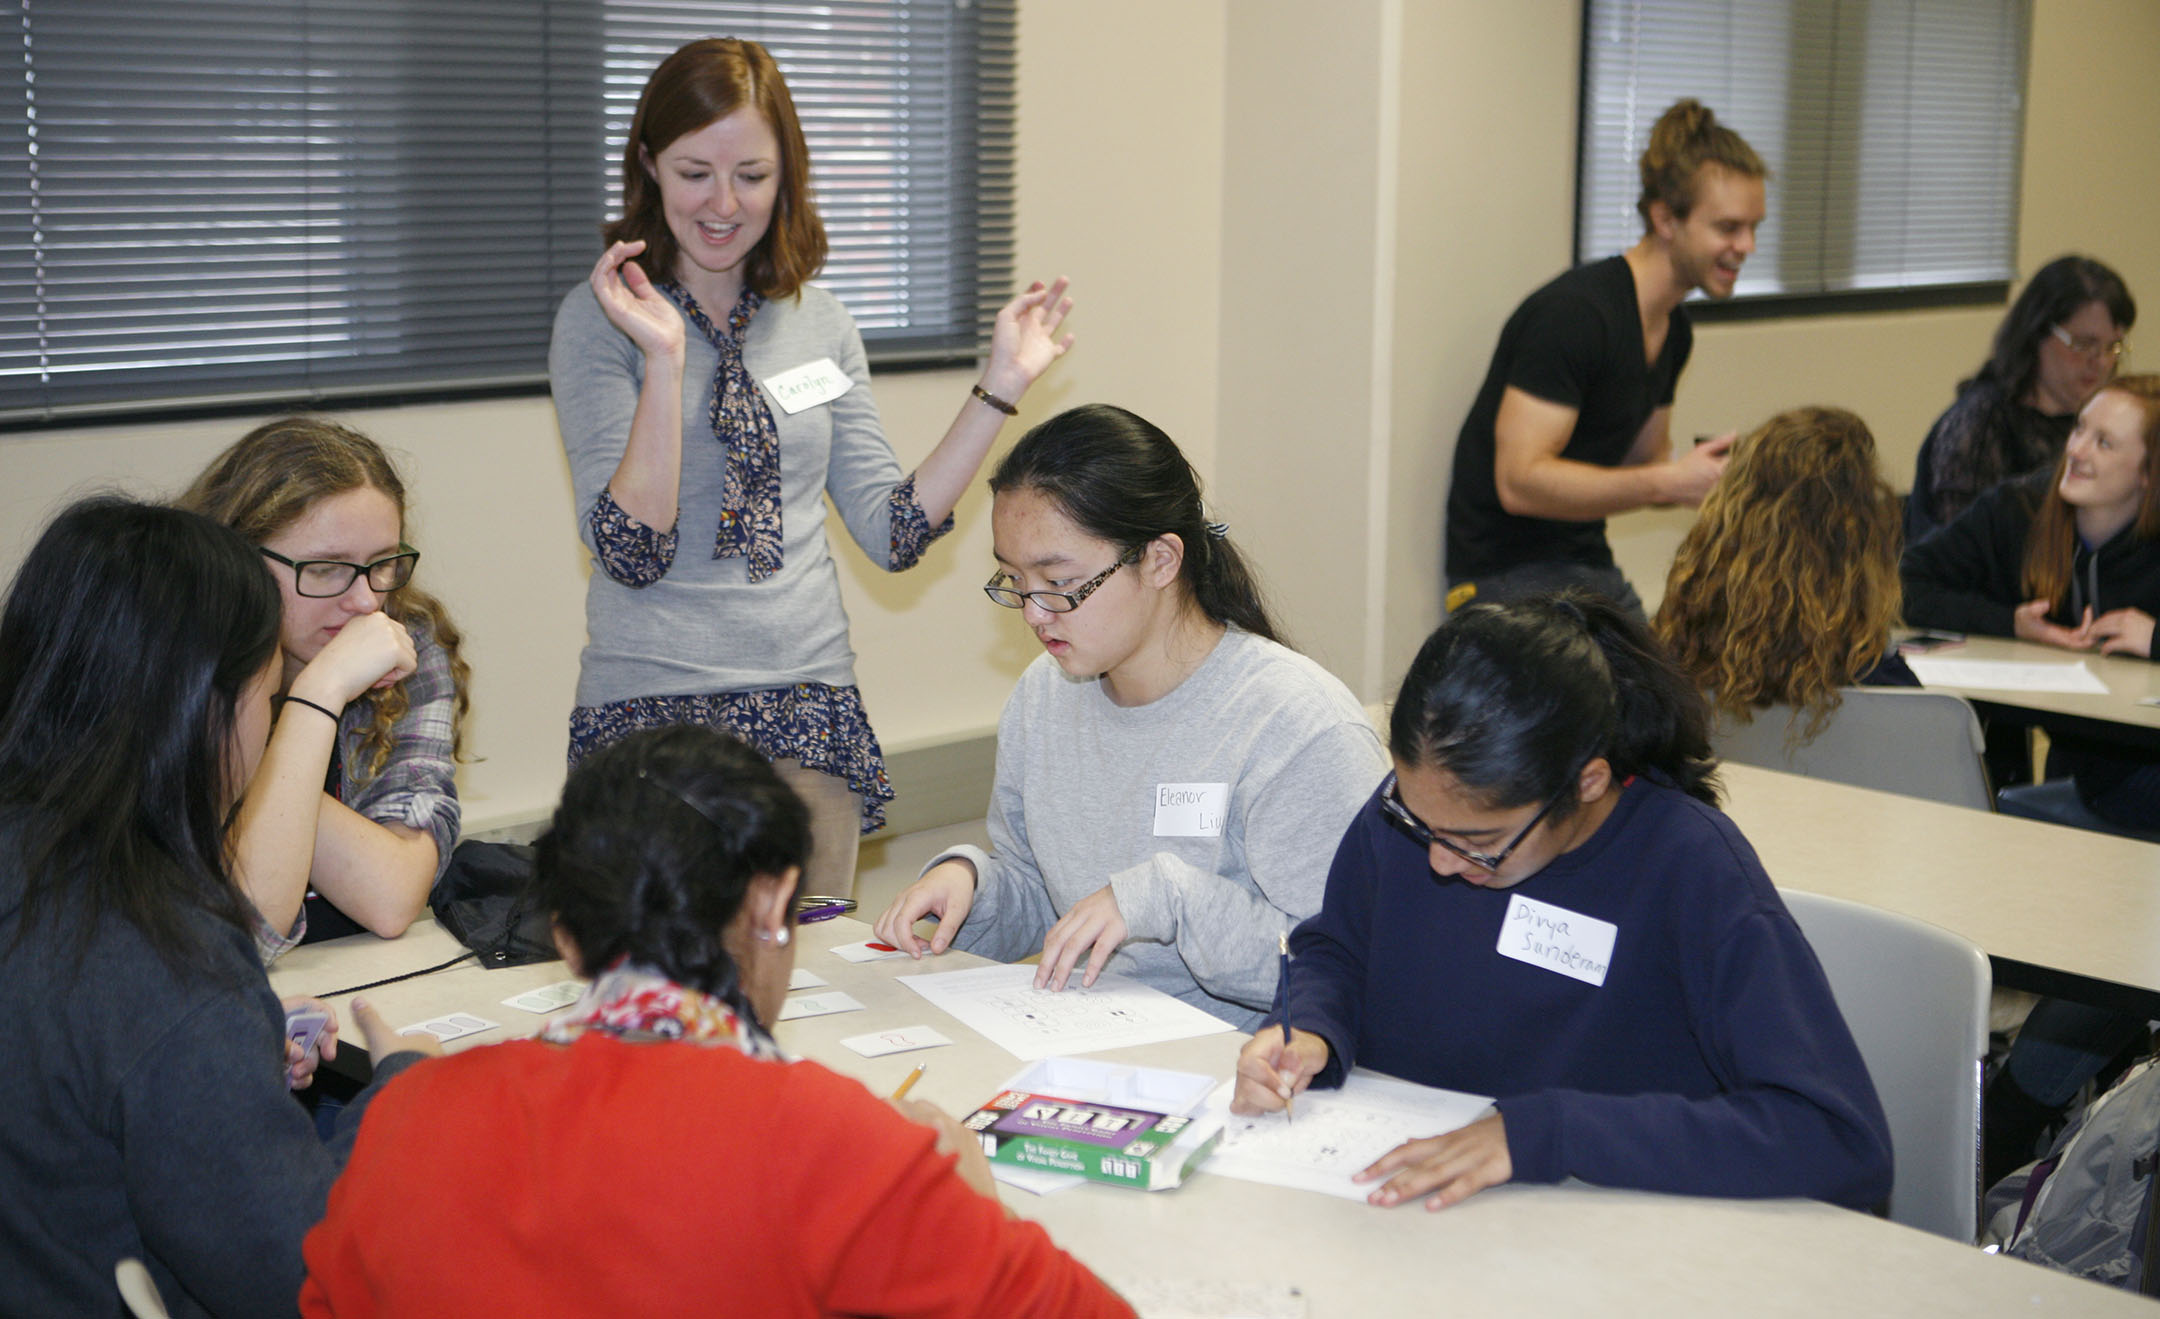 Carolyn Yarnall, a postdoctoral scholar in the University of Kentucky’s Department of Mathematics, reacts as girls play a variation of the card game Set during UK High School Mathematics Day for Women. The players are (clockwise from front) Niki Rajendran of Franklin County High School and Helen Pang, Leni Broady, Eleanor Liu and Divya Sunderam of Paul Laurence Dunbar High School (Fayette County), The event attracted about 60 girls who are interested in mathematics, many of whom came with their teachers. Photo by Mike Marsee, Nov. 7, 2015